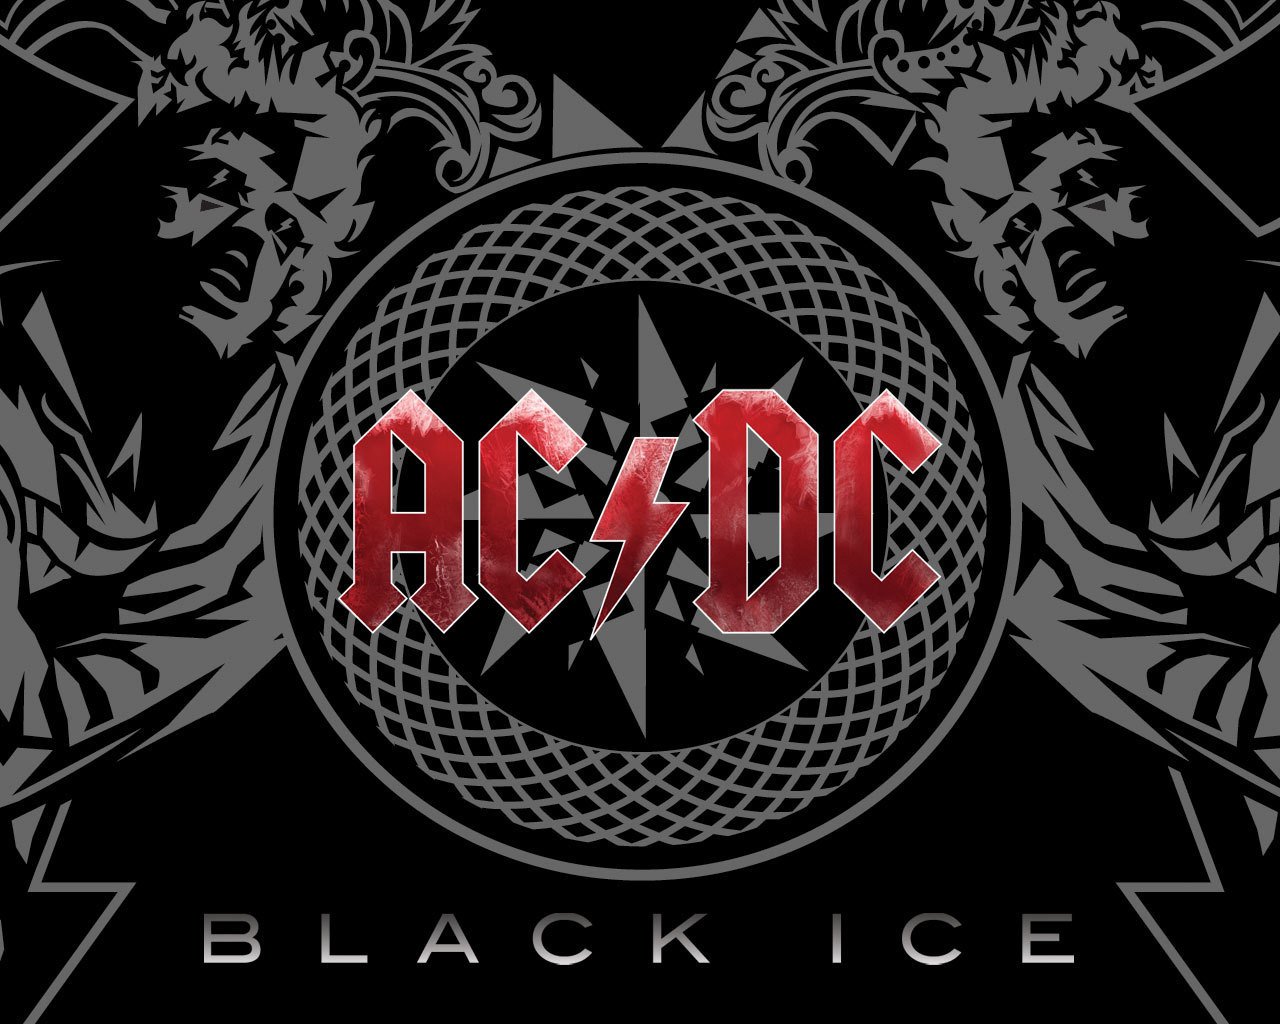 acdc hd wallpapers extras excelente post   Taringa 1280x1024